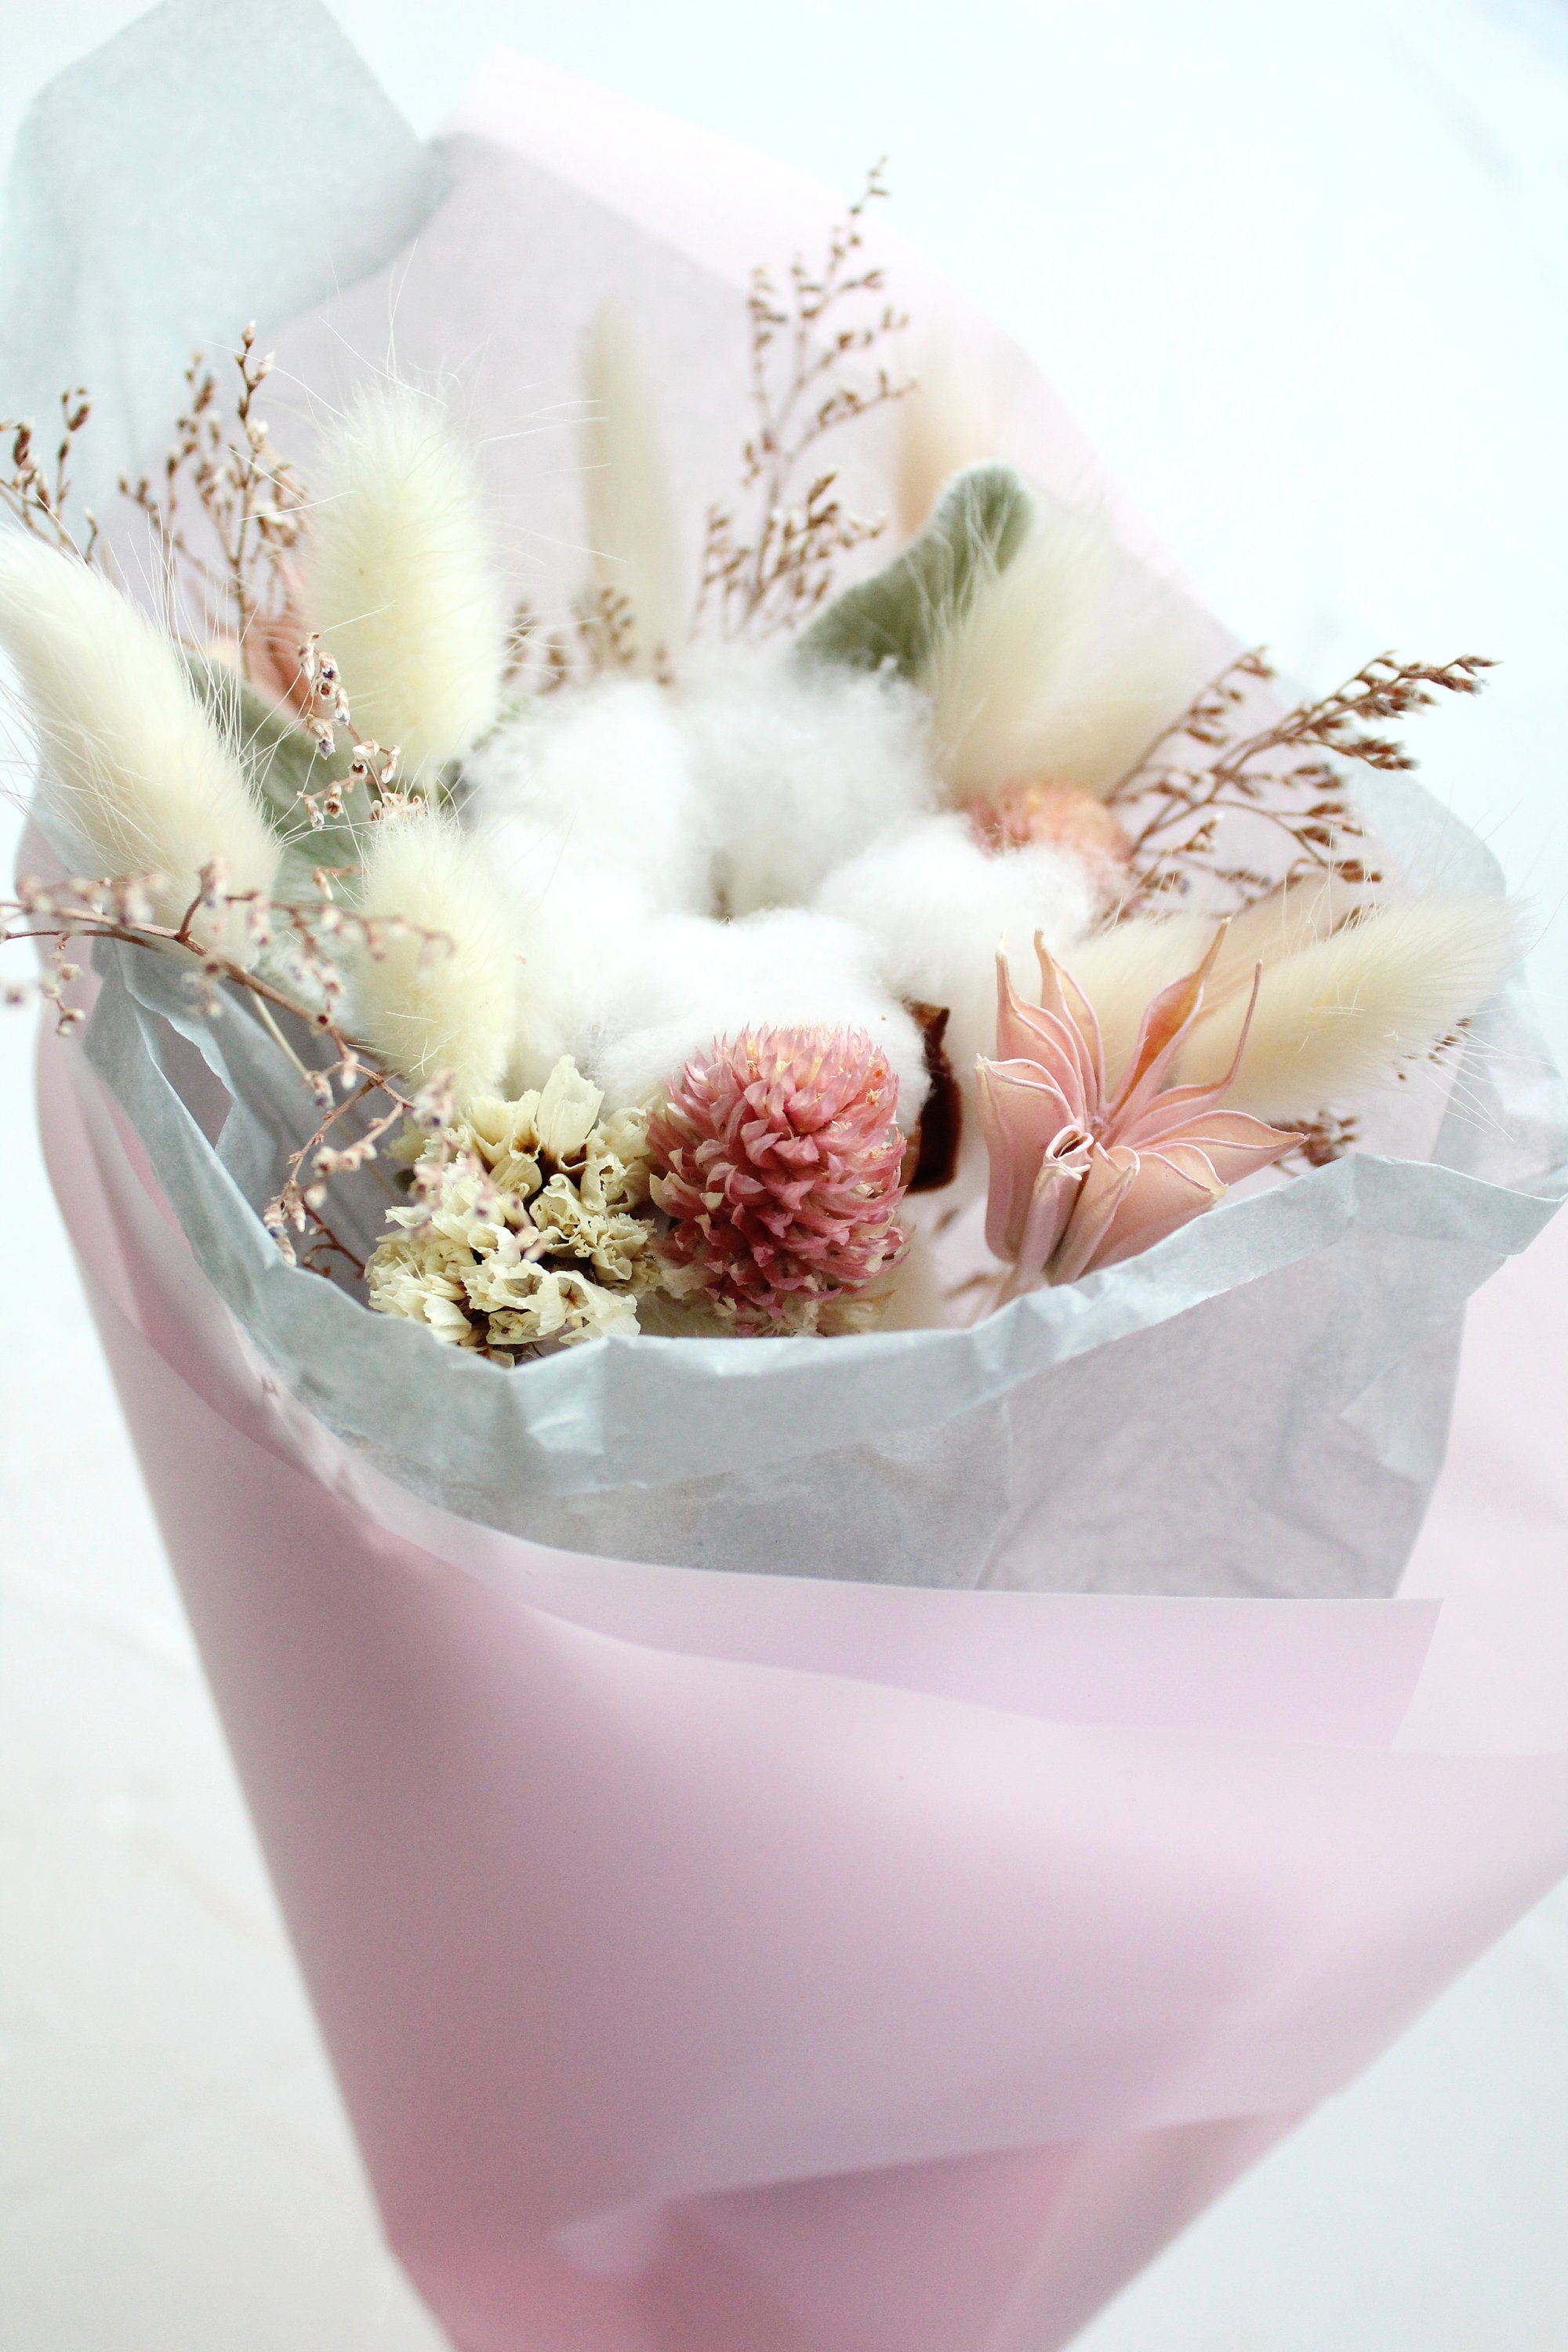 Small bride or bridesmaid wedding bouquet of dried flowers in green and pink colours